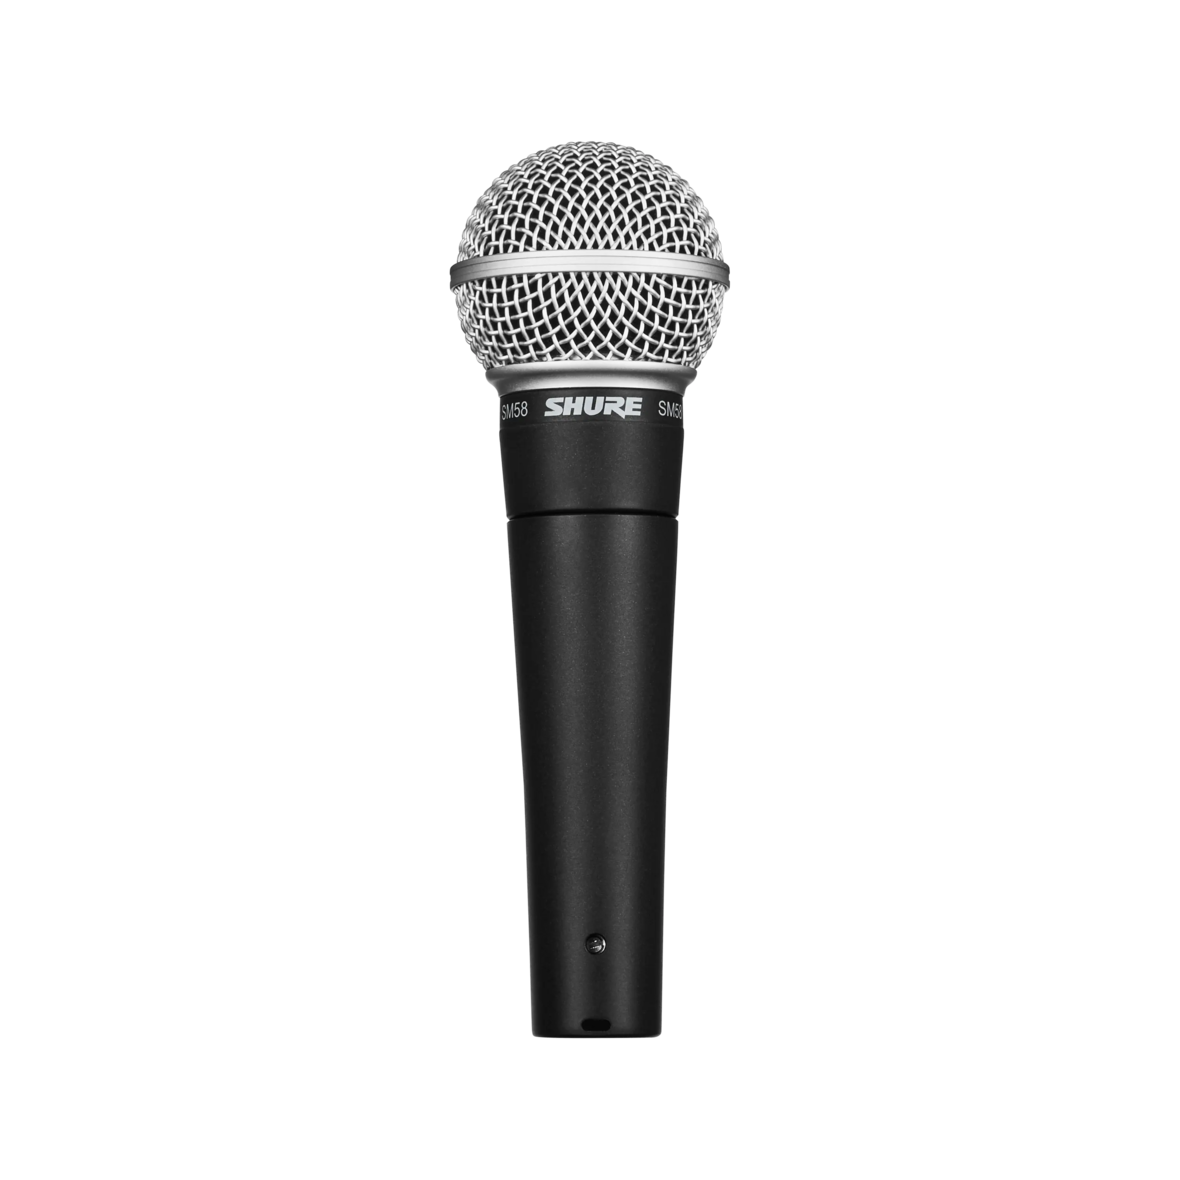 The Shure SM58 for Face to Face Podcast Interviews & Co-Hosting